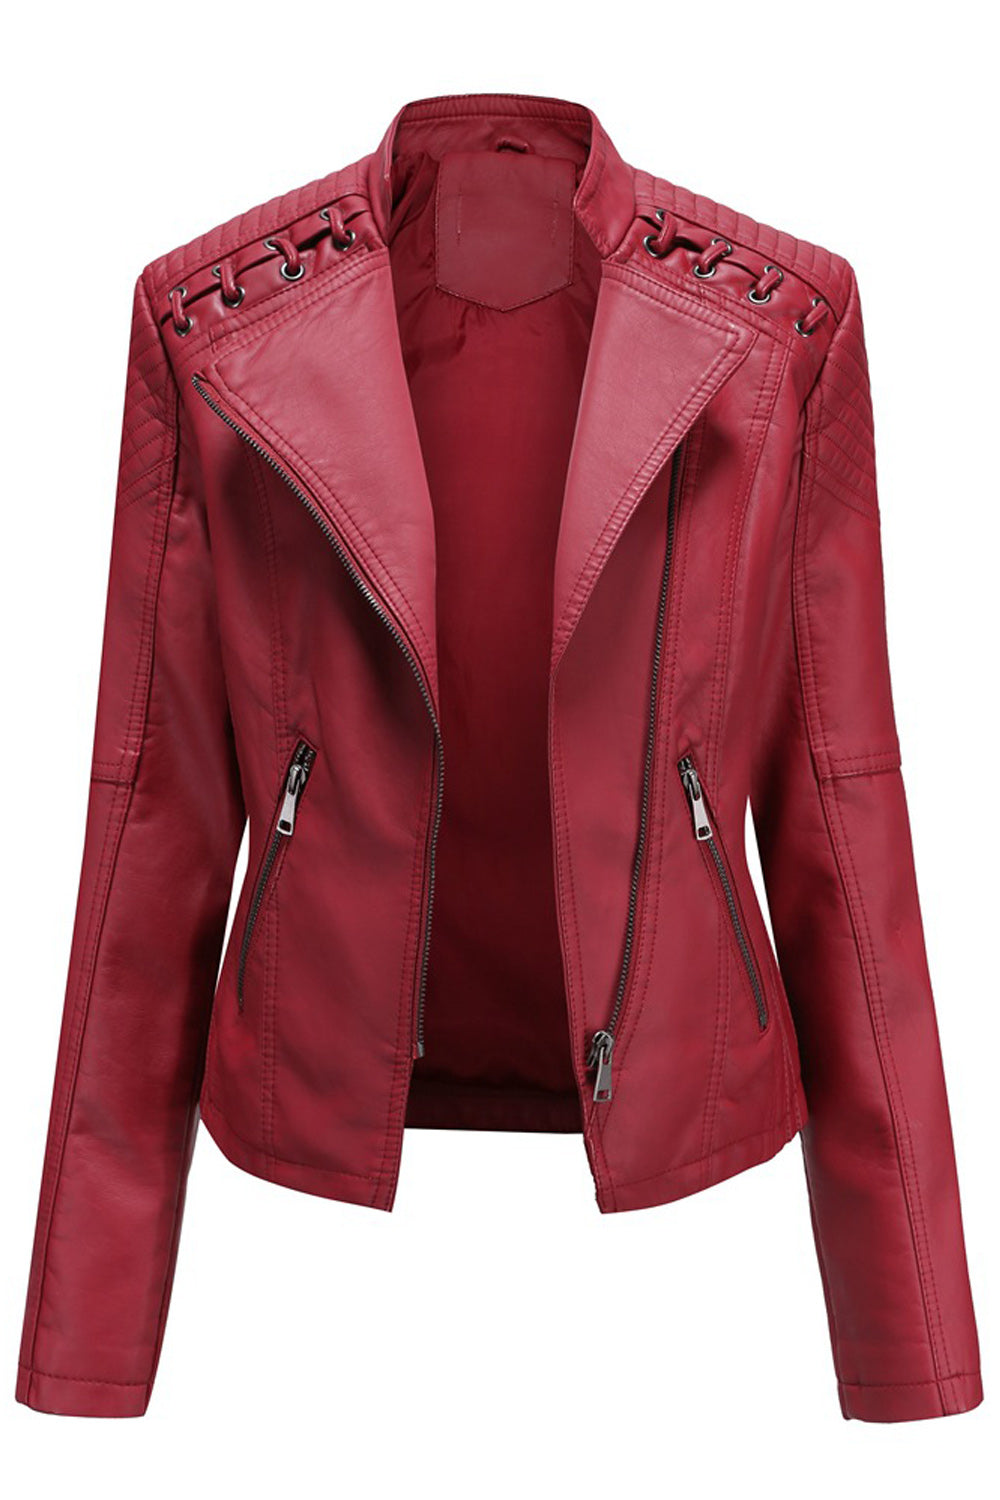 Women Convenient Solid Colored Long Sleeve Warm Leather Jacket - WJK89480